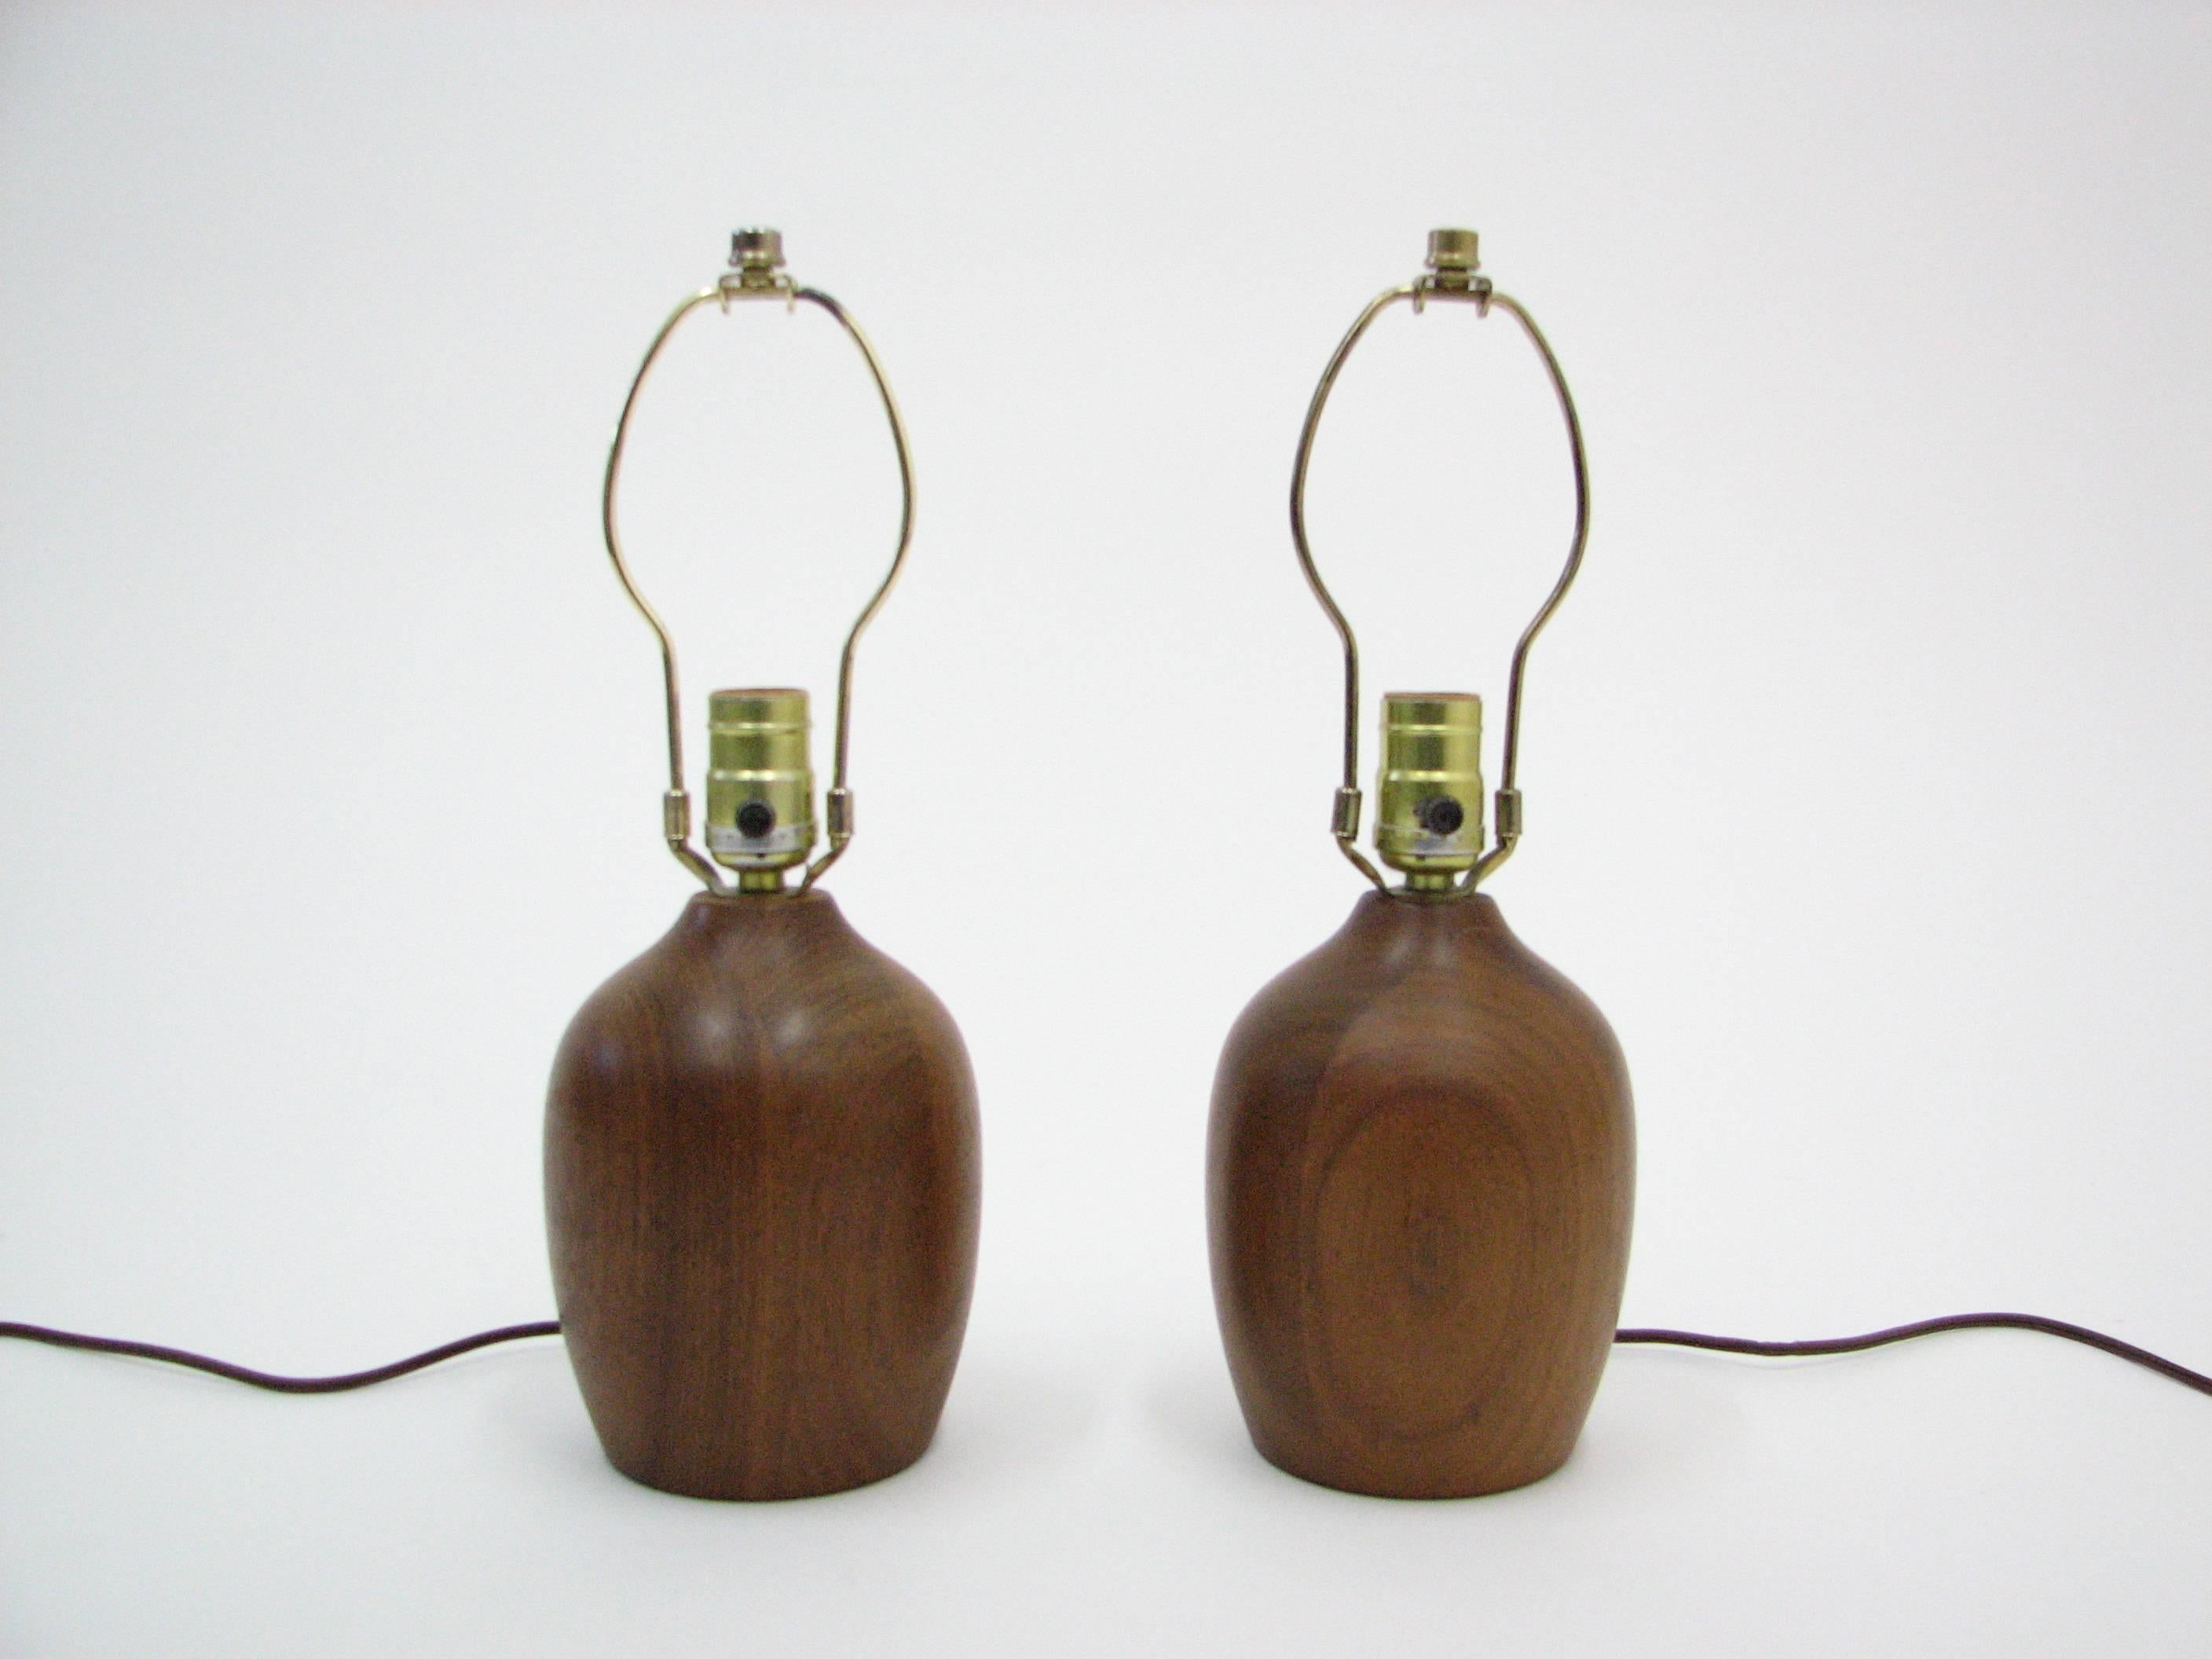 A powerhouse pair of well-crafted petite teak lamps.

Shades are pictured for demo purposes only.  We do not have shades available for these lamps.

Please note:  Pickup for these lamps is in Denver, Colorado.
